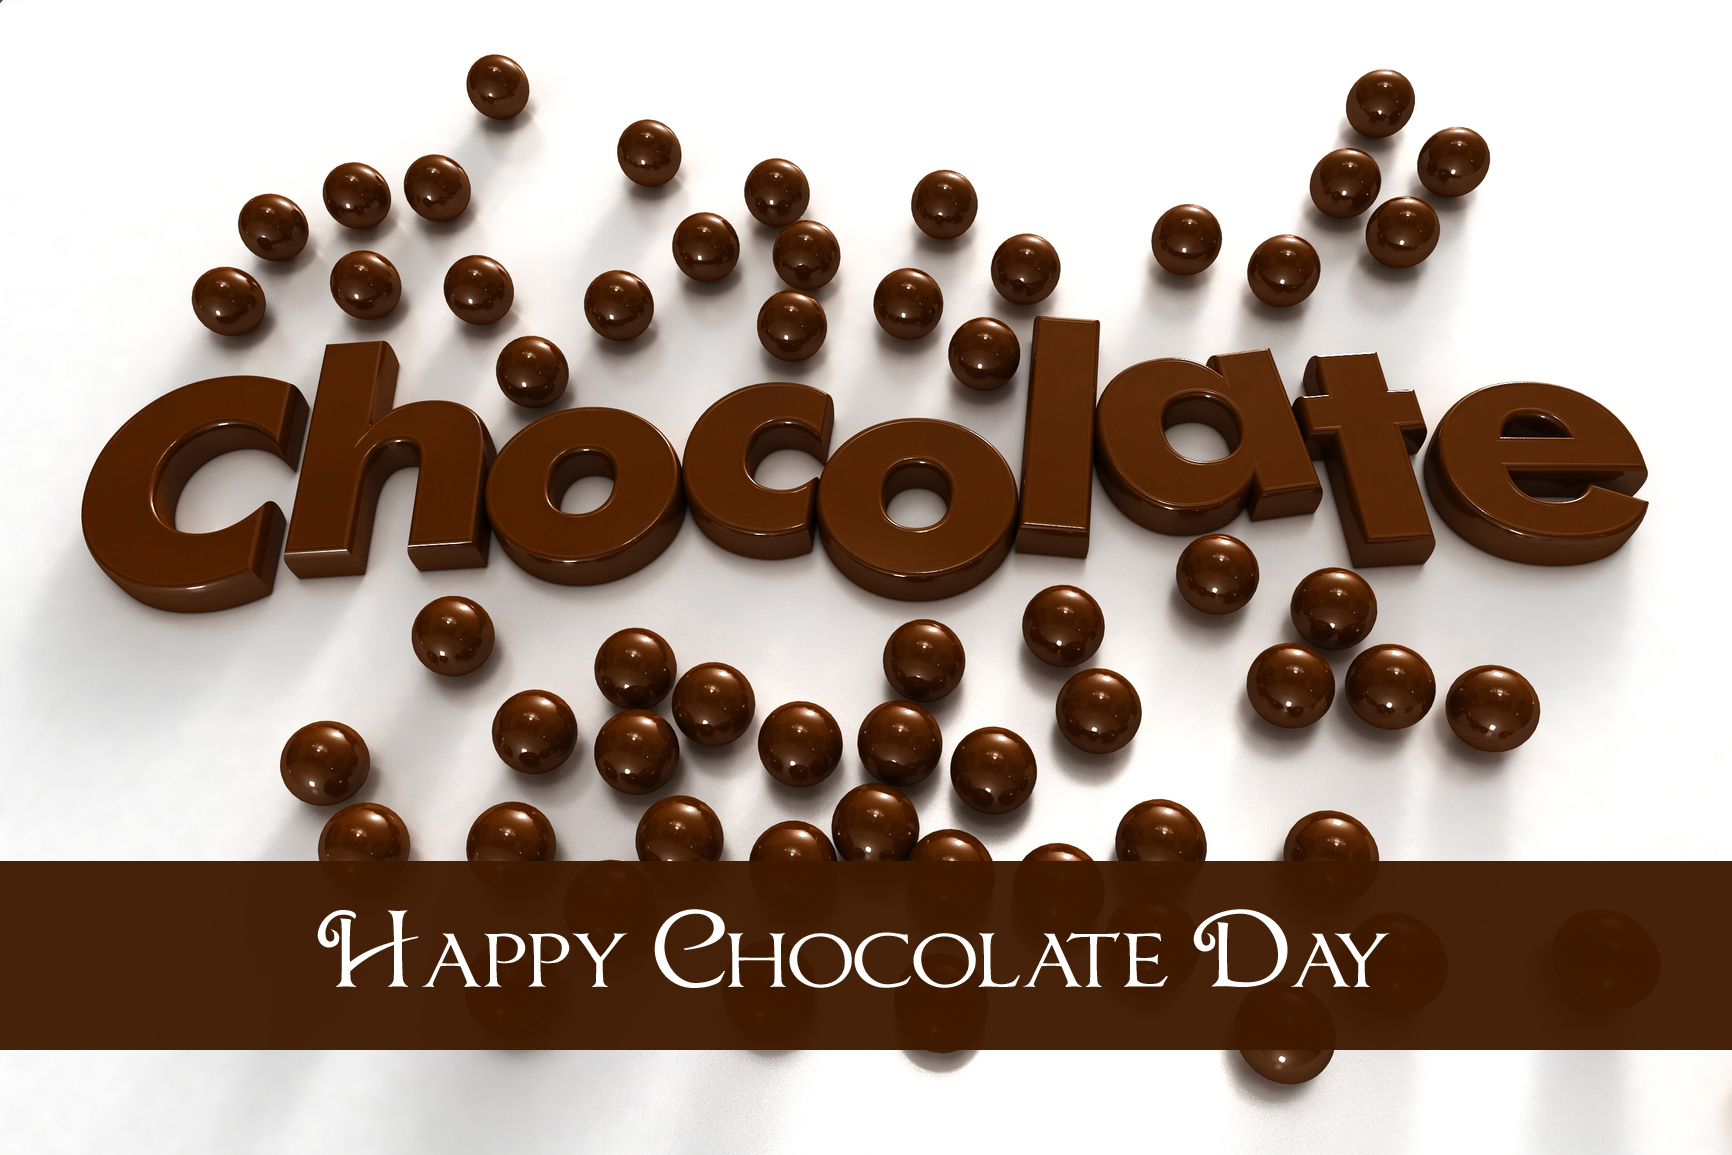 about chocolate day quotes images wishes and information